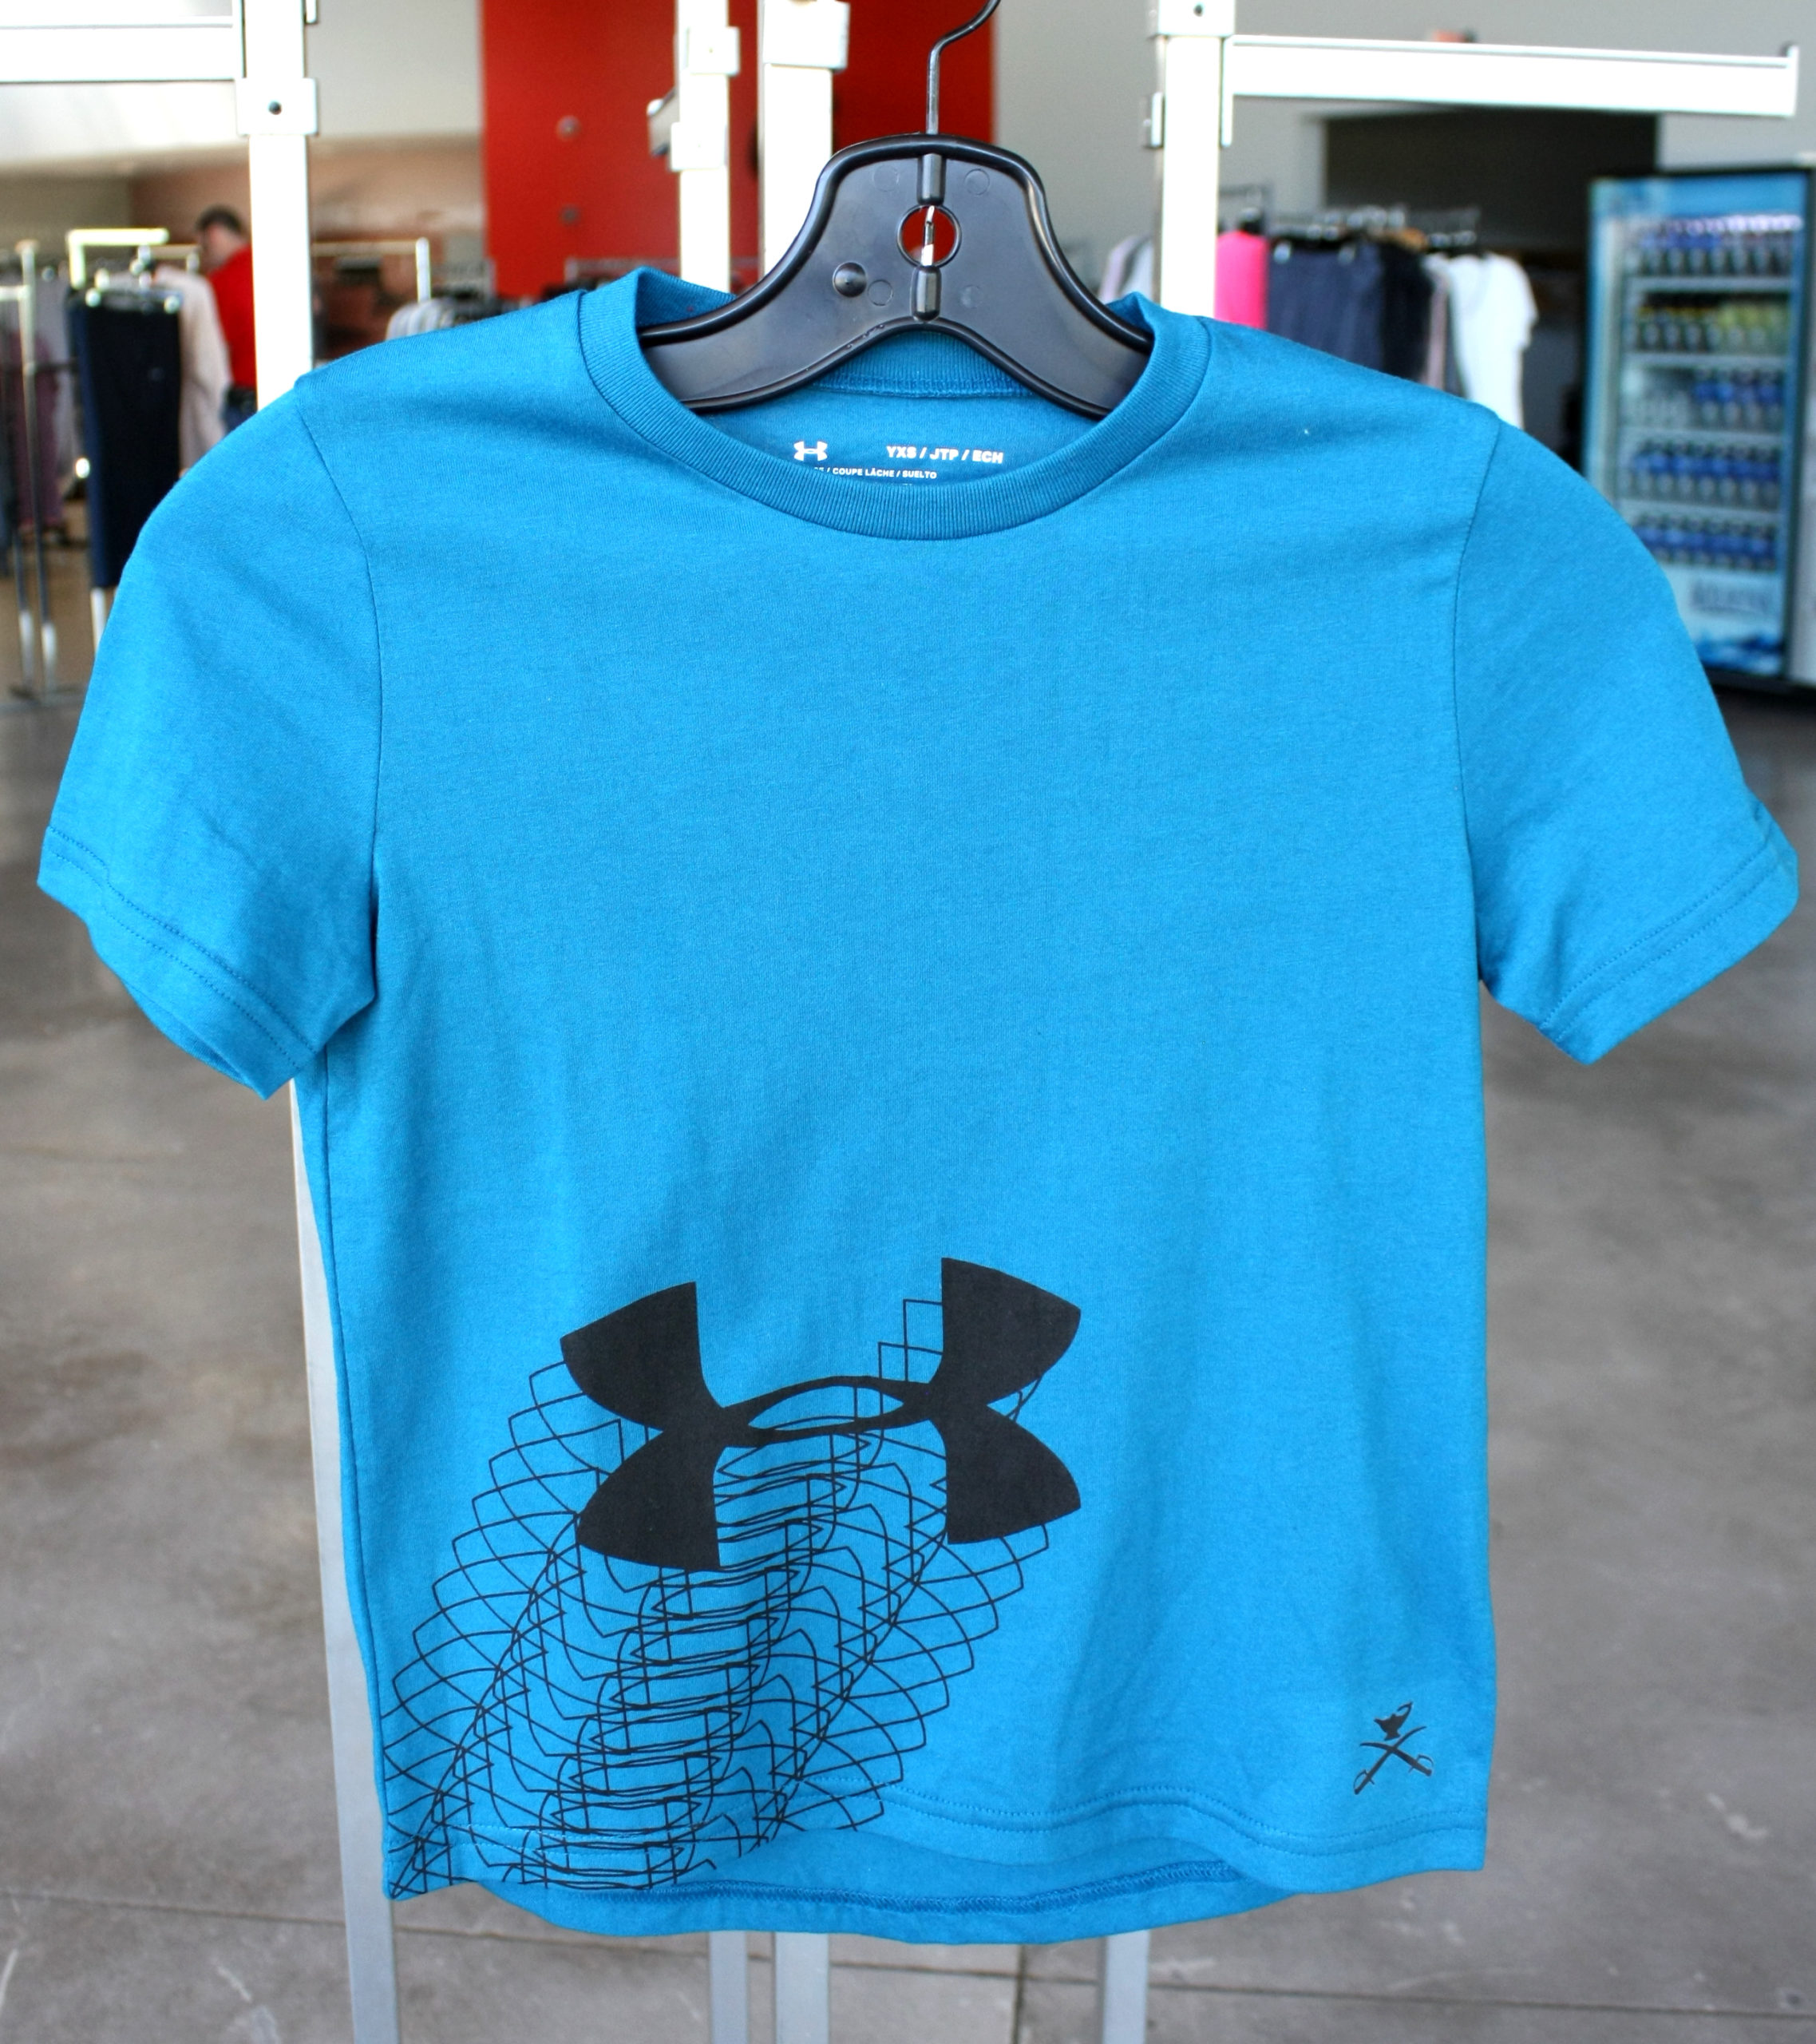 under armour t shirts youth